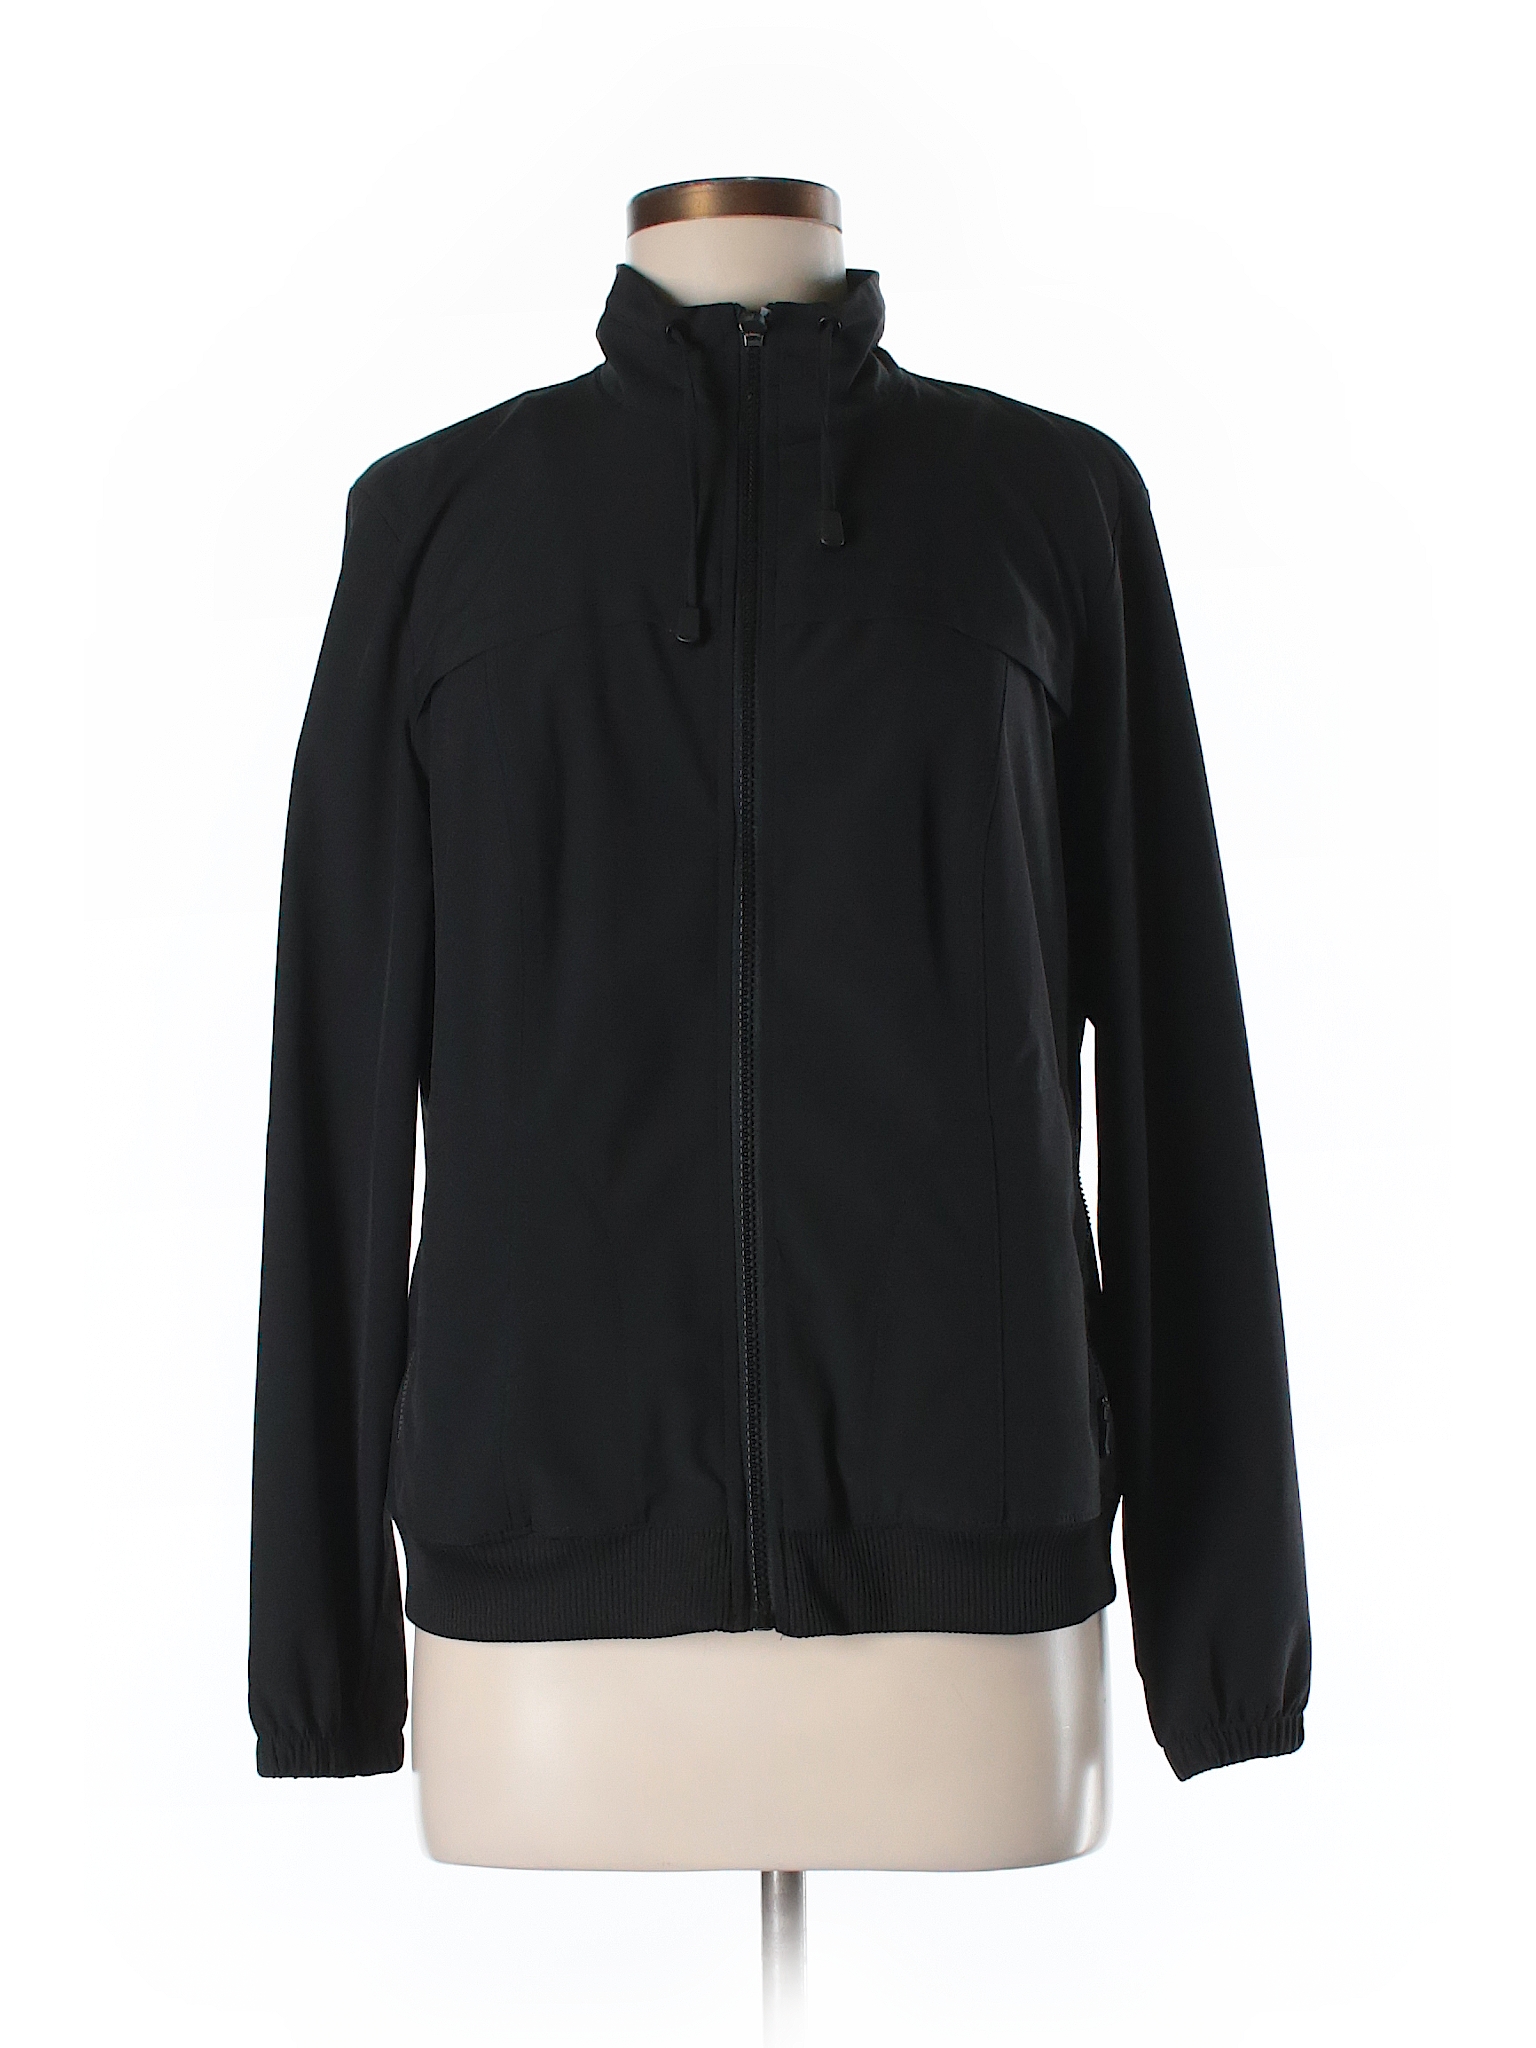 Zenergy by Chico's Solid Black Track Jacket Size Med (1) - 80% off ...